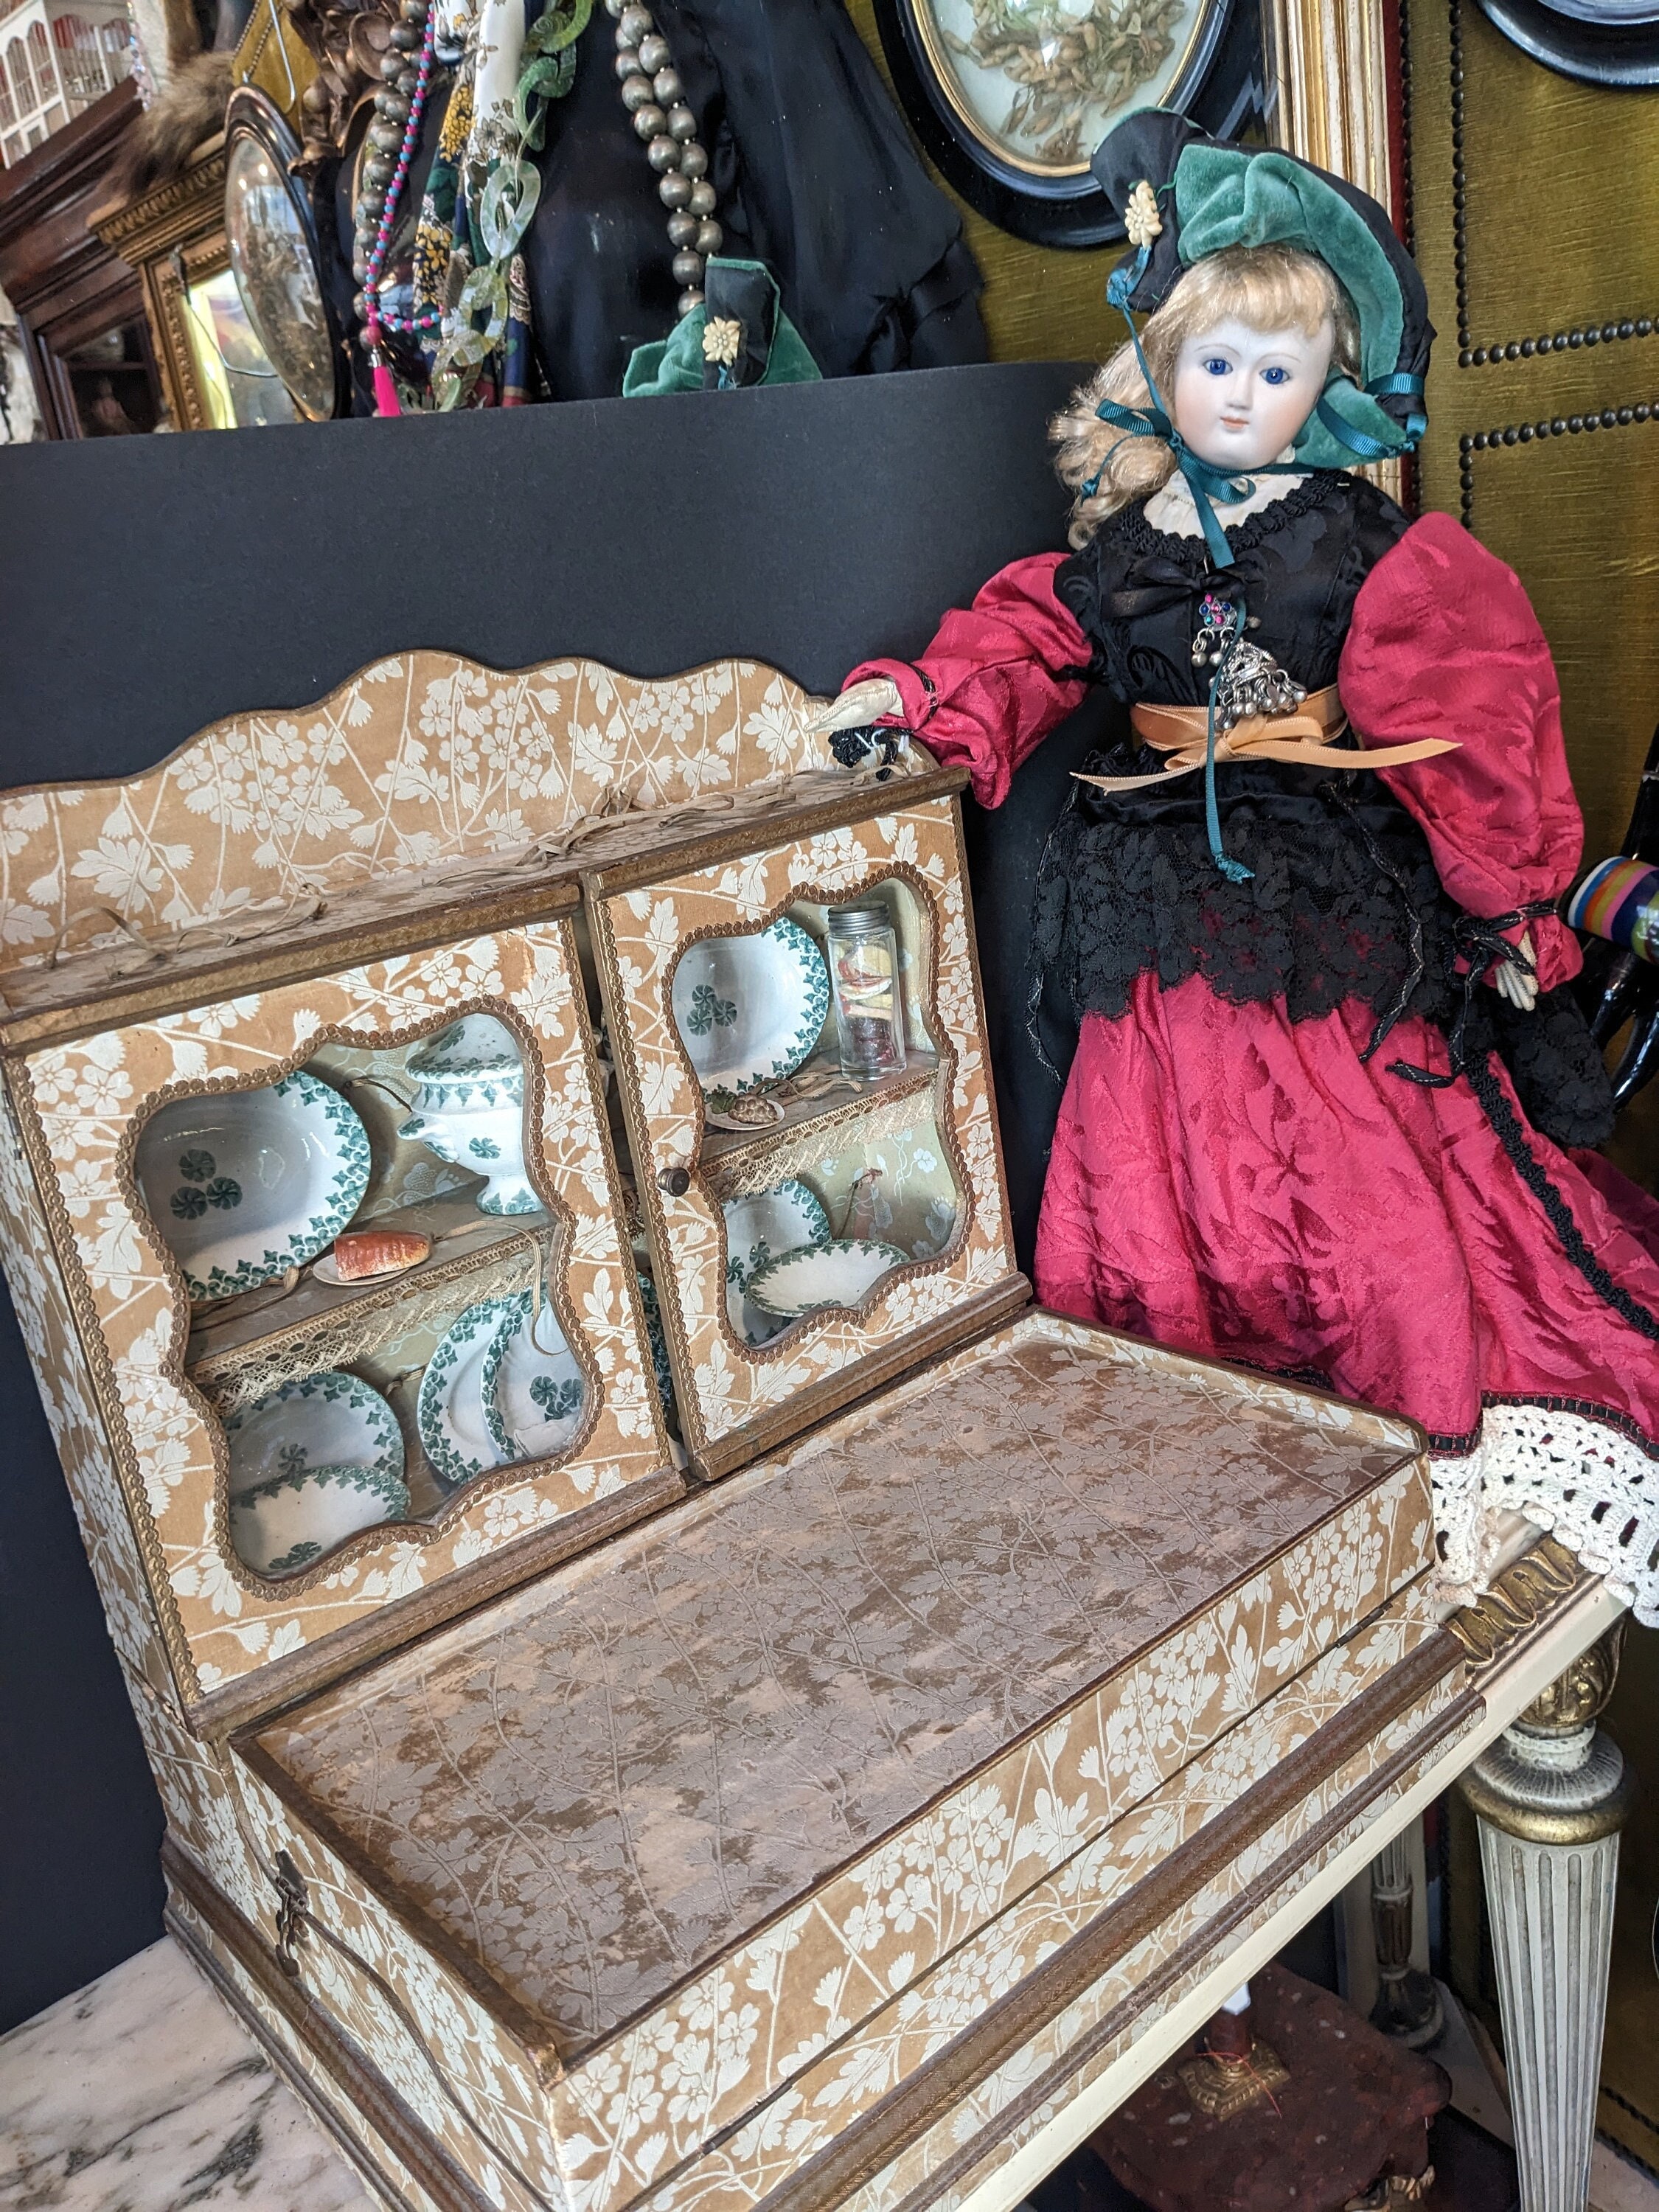 K*R Bisque Doll in Original Presentation Case for the French Market